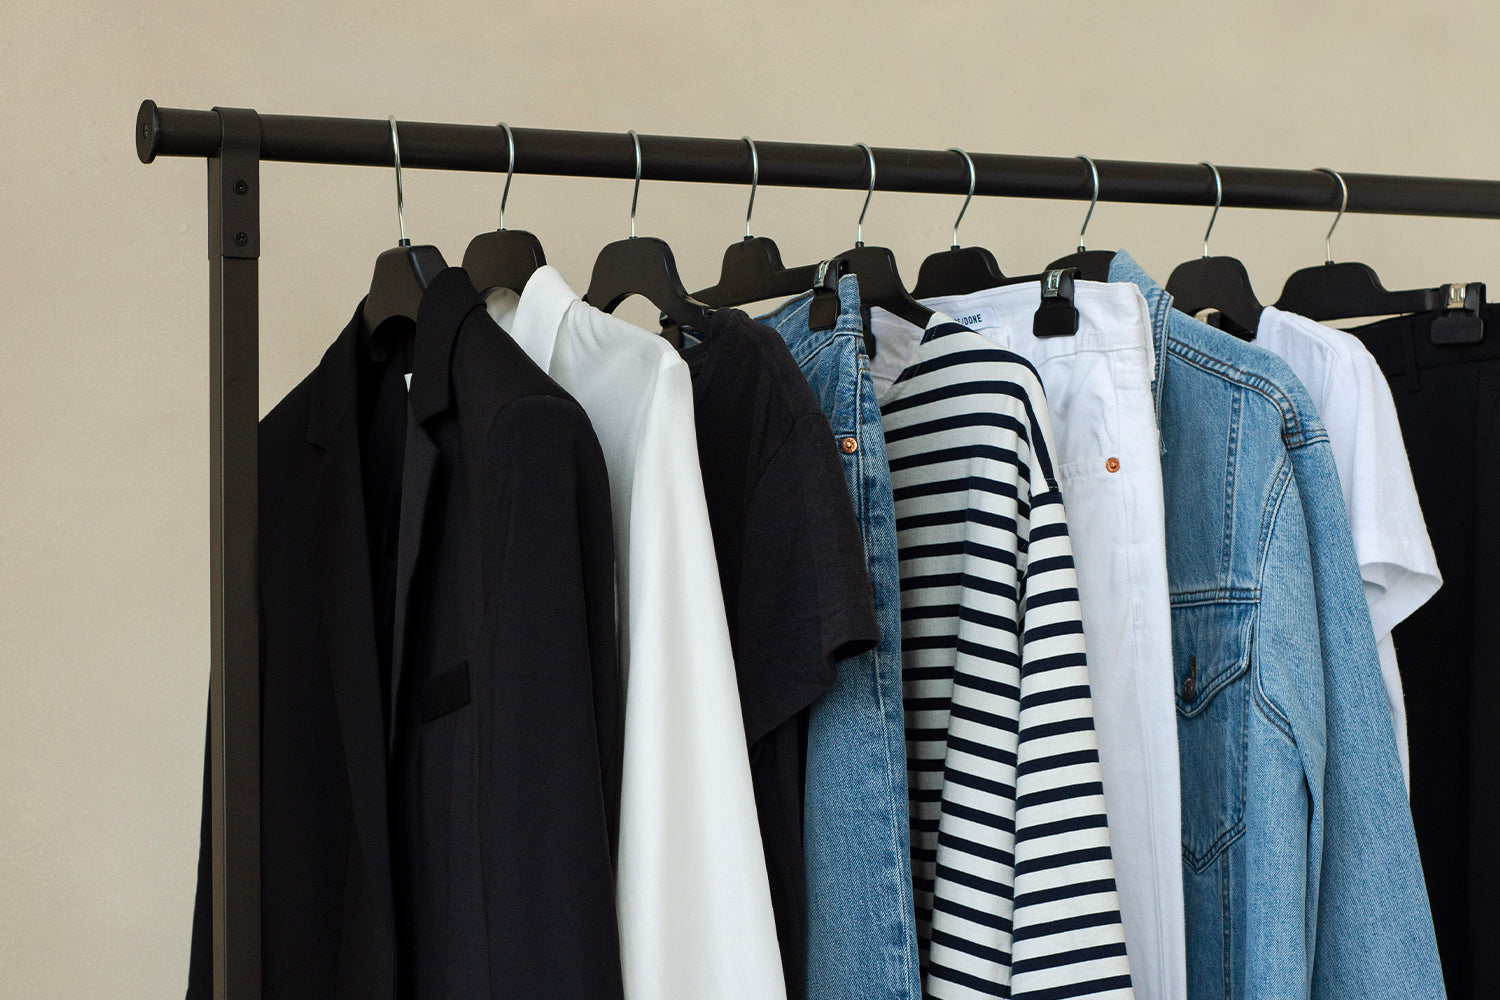 How to avoid buying clothes you'll never wear